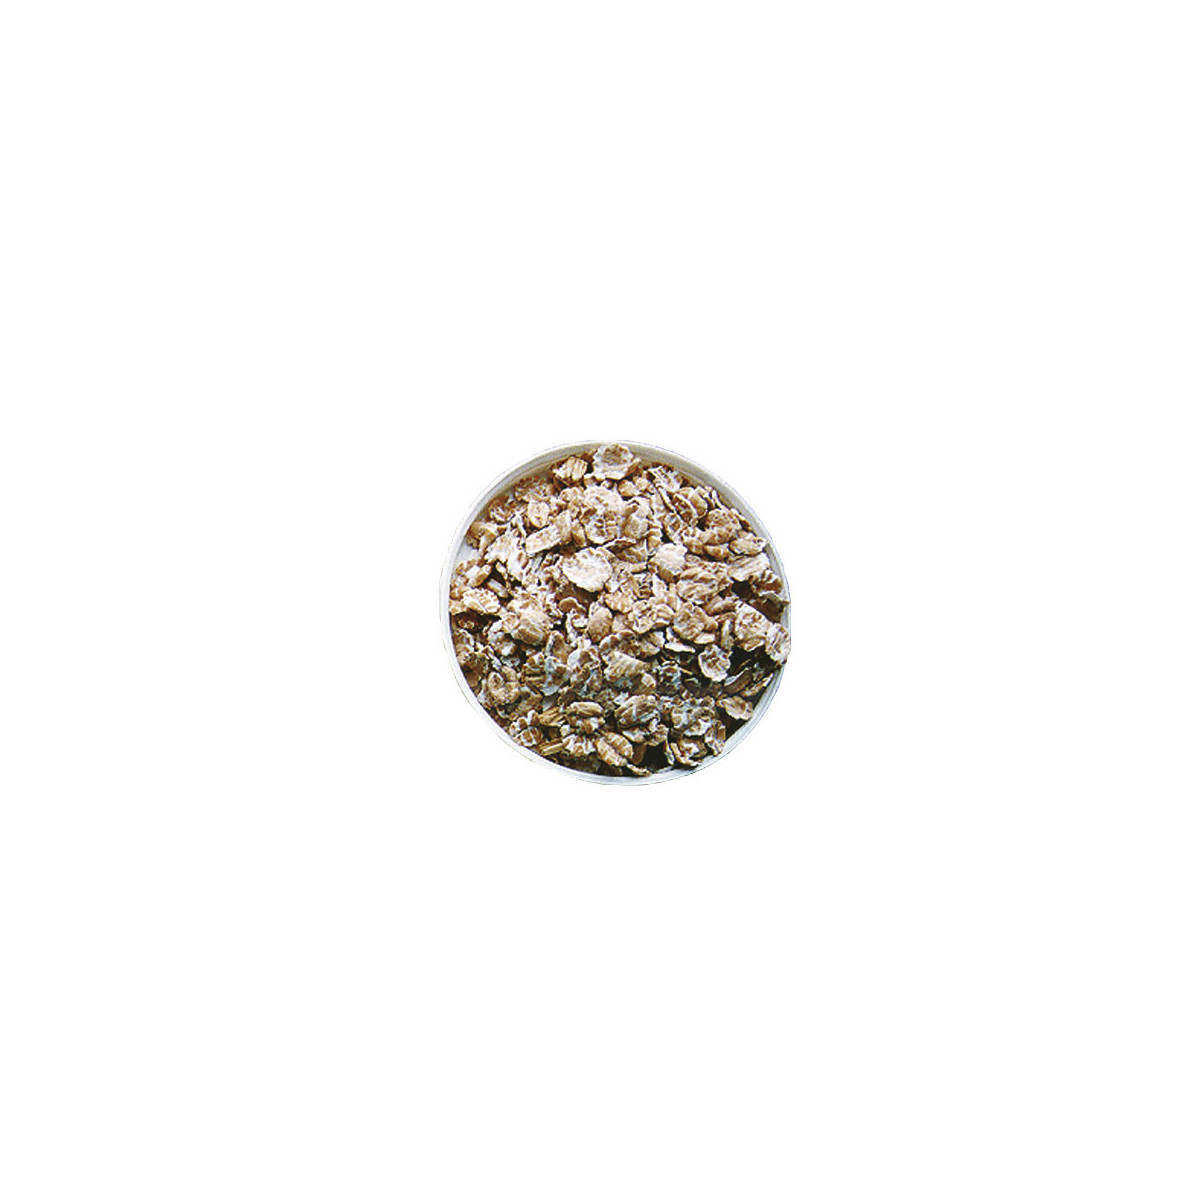 flaked wheat 1 kg